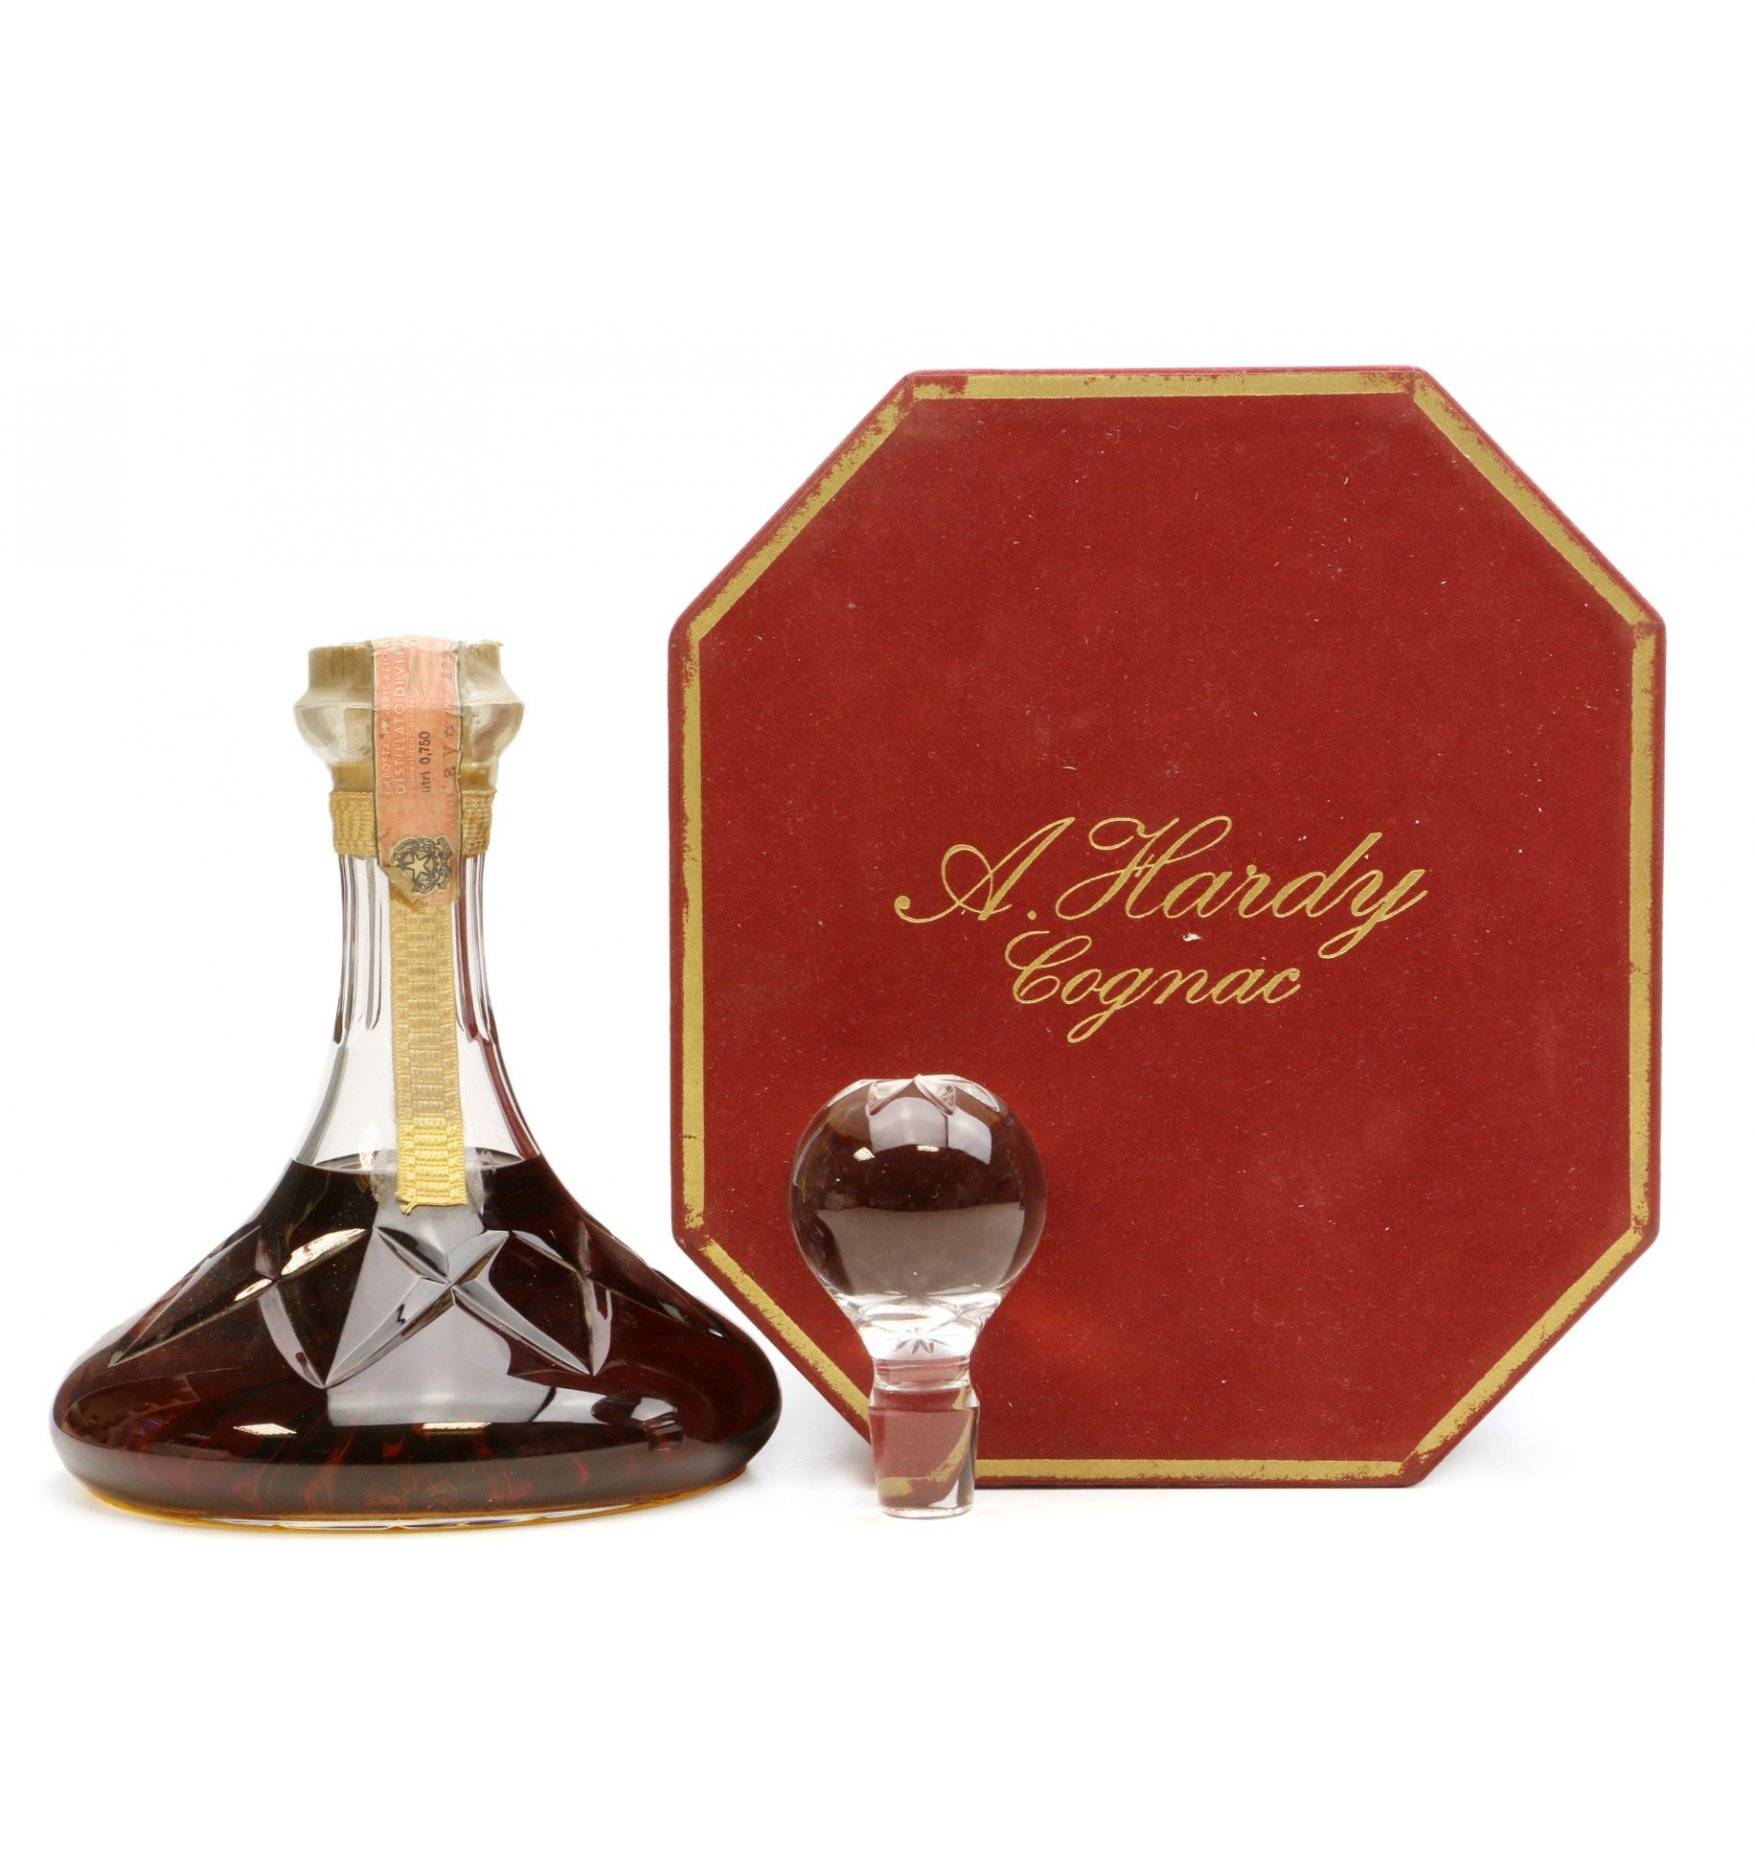 A. Hardy Cognac - Captain Noces d'Or, (750ml) - Just Whisky Auctions